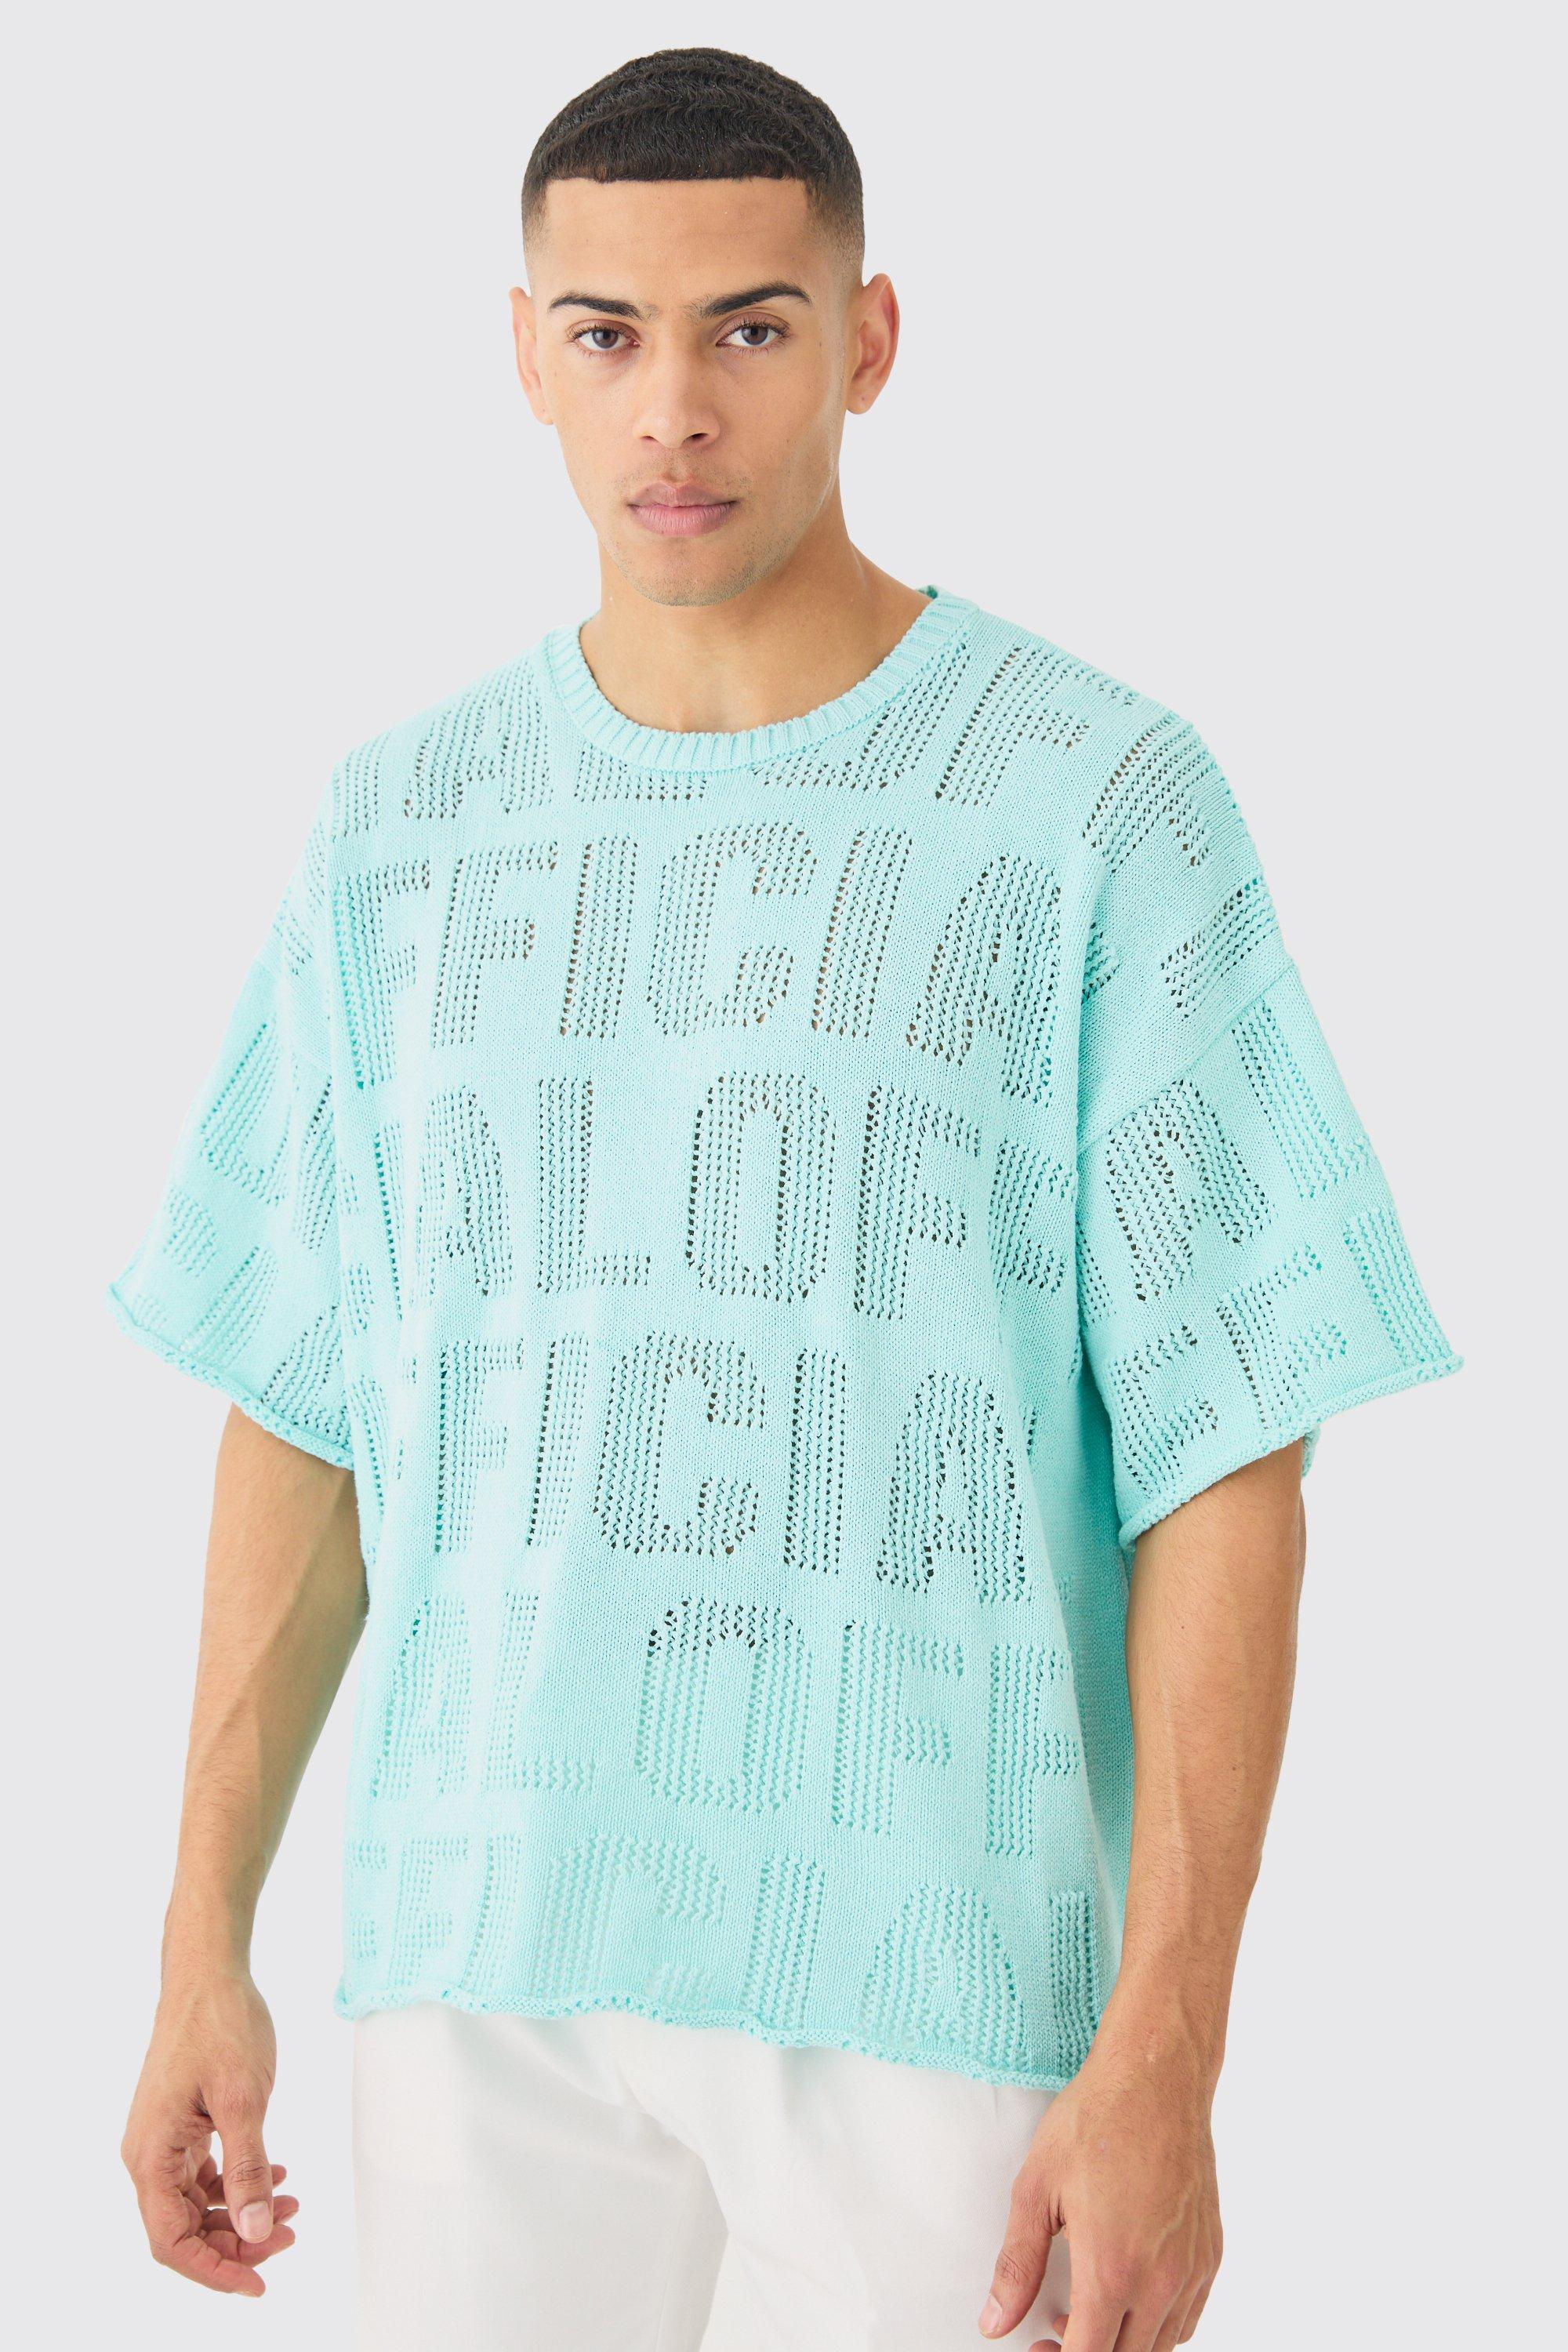 Image of Oversized Branded Open Stitch T-shirt In Light Blue, Azzurro